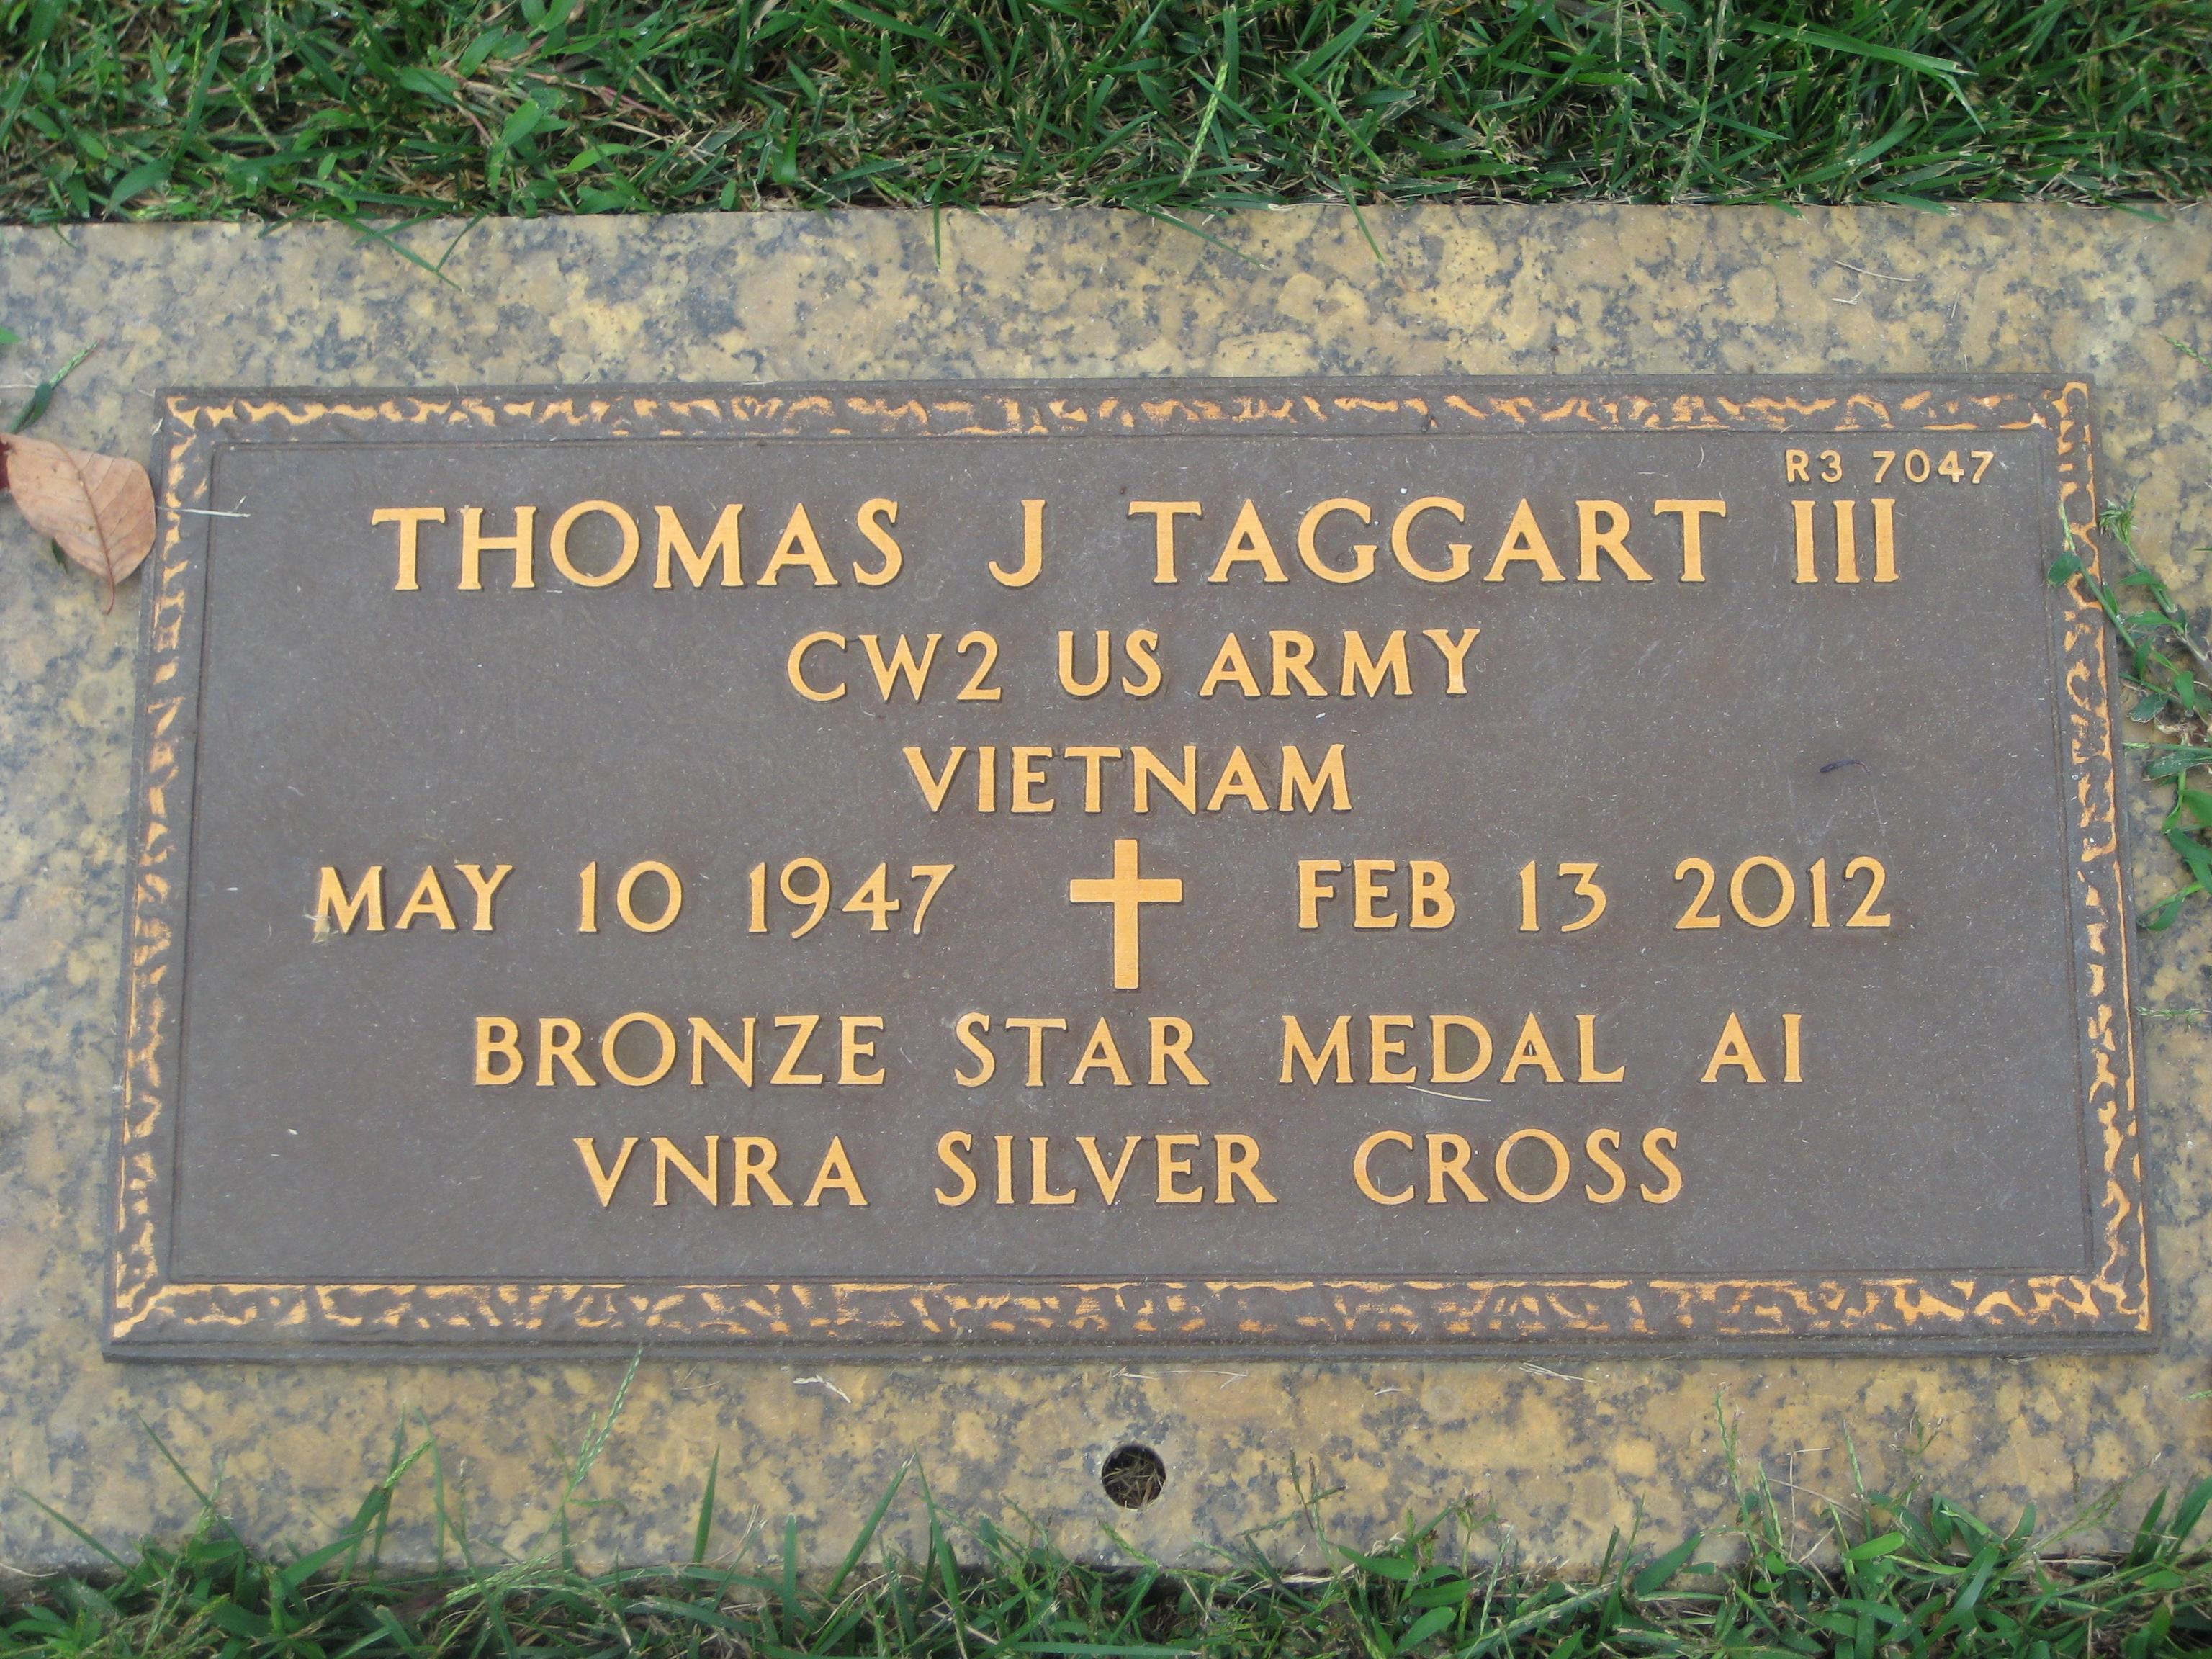 Taggart grave